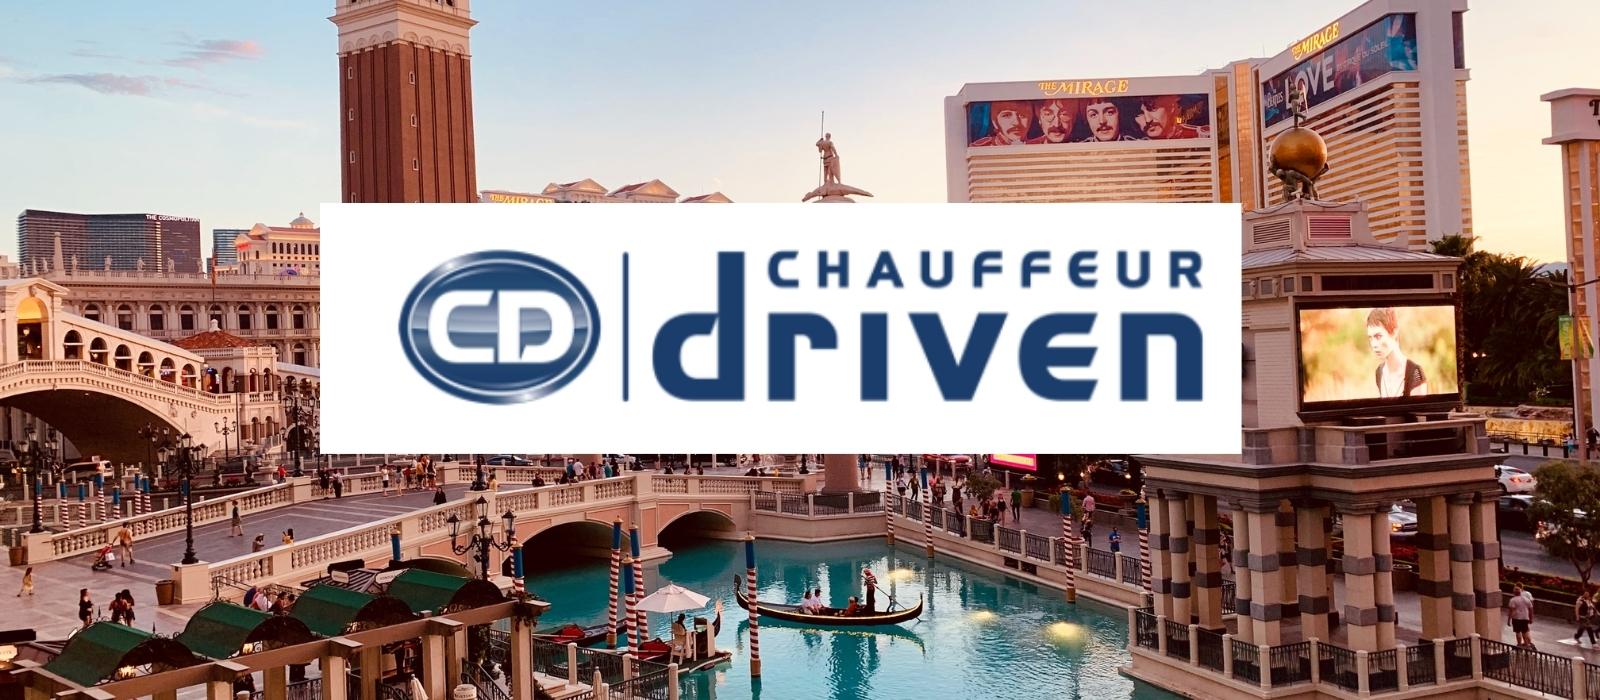 CHAUFFEUR DRIVEN - 2022 TRADESHOW AND CONFERENCE